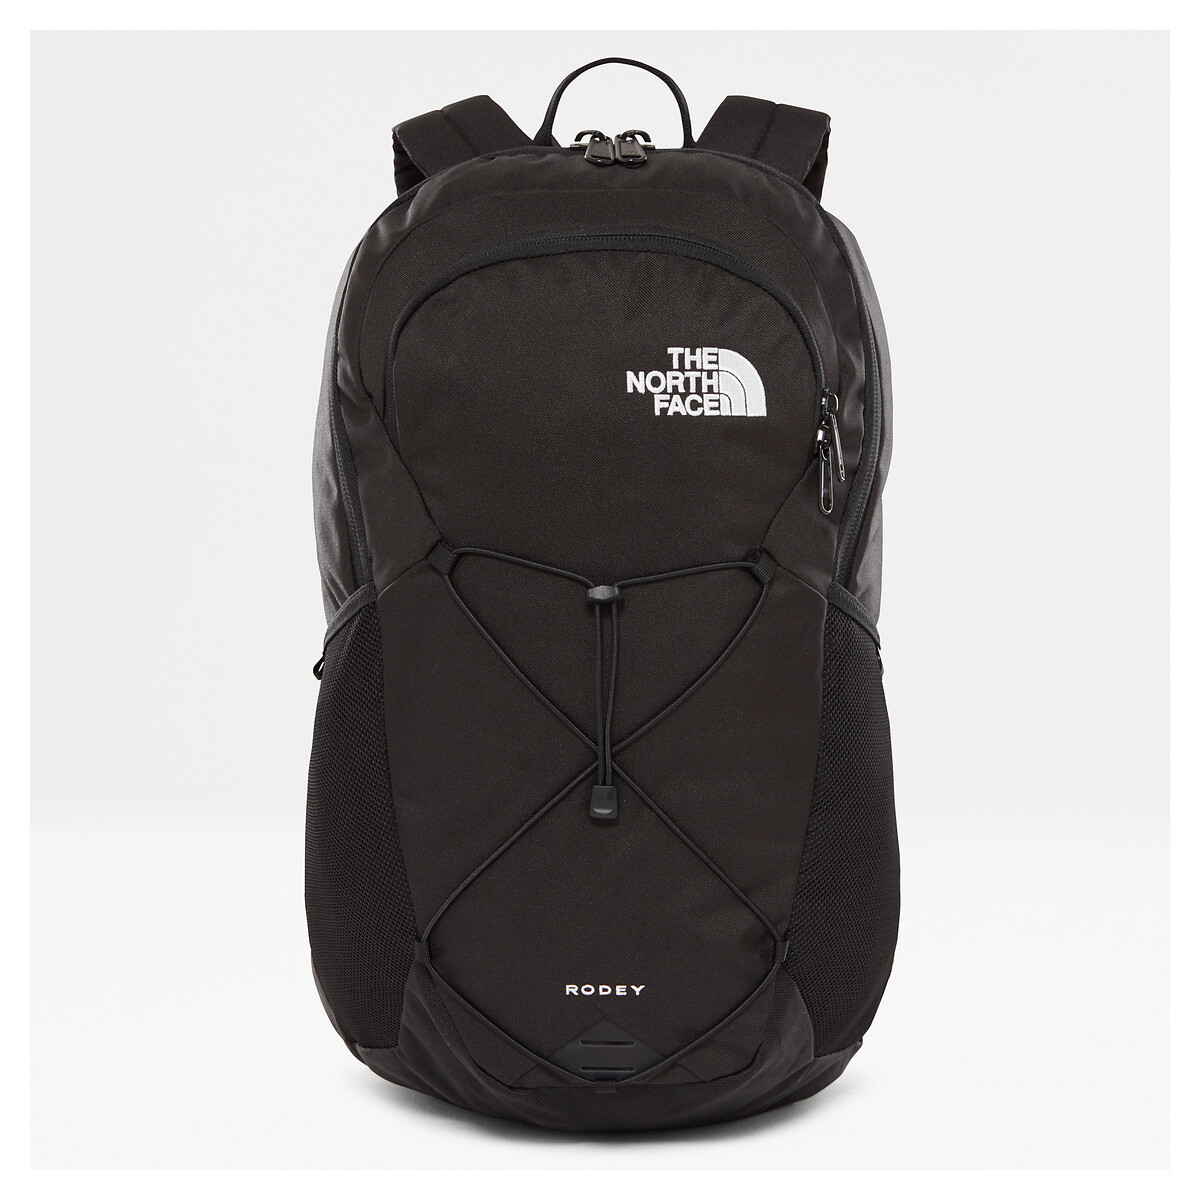 Image of Rodey Backpack